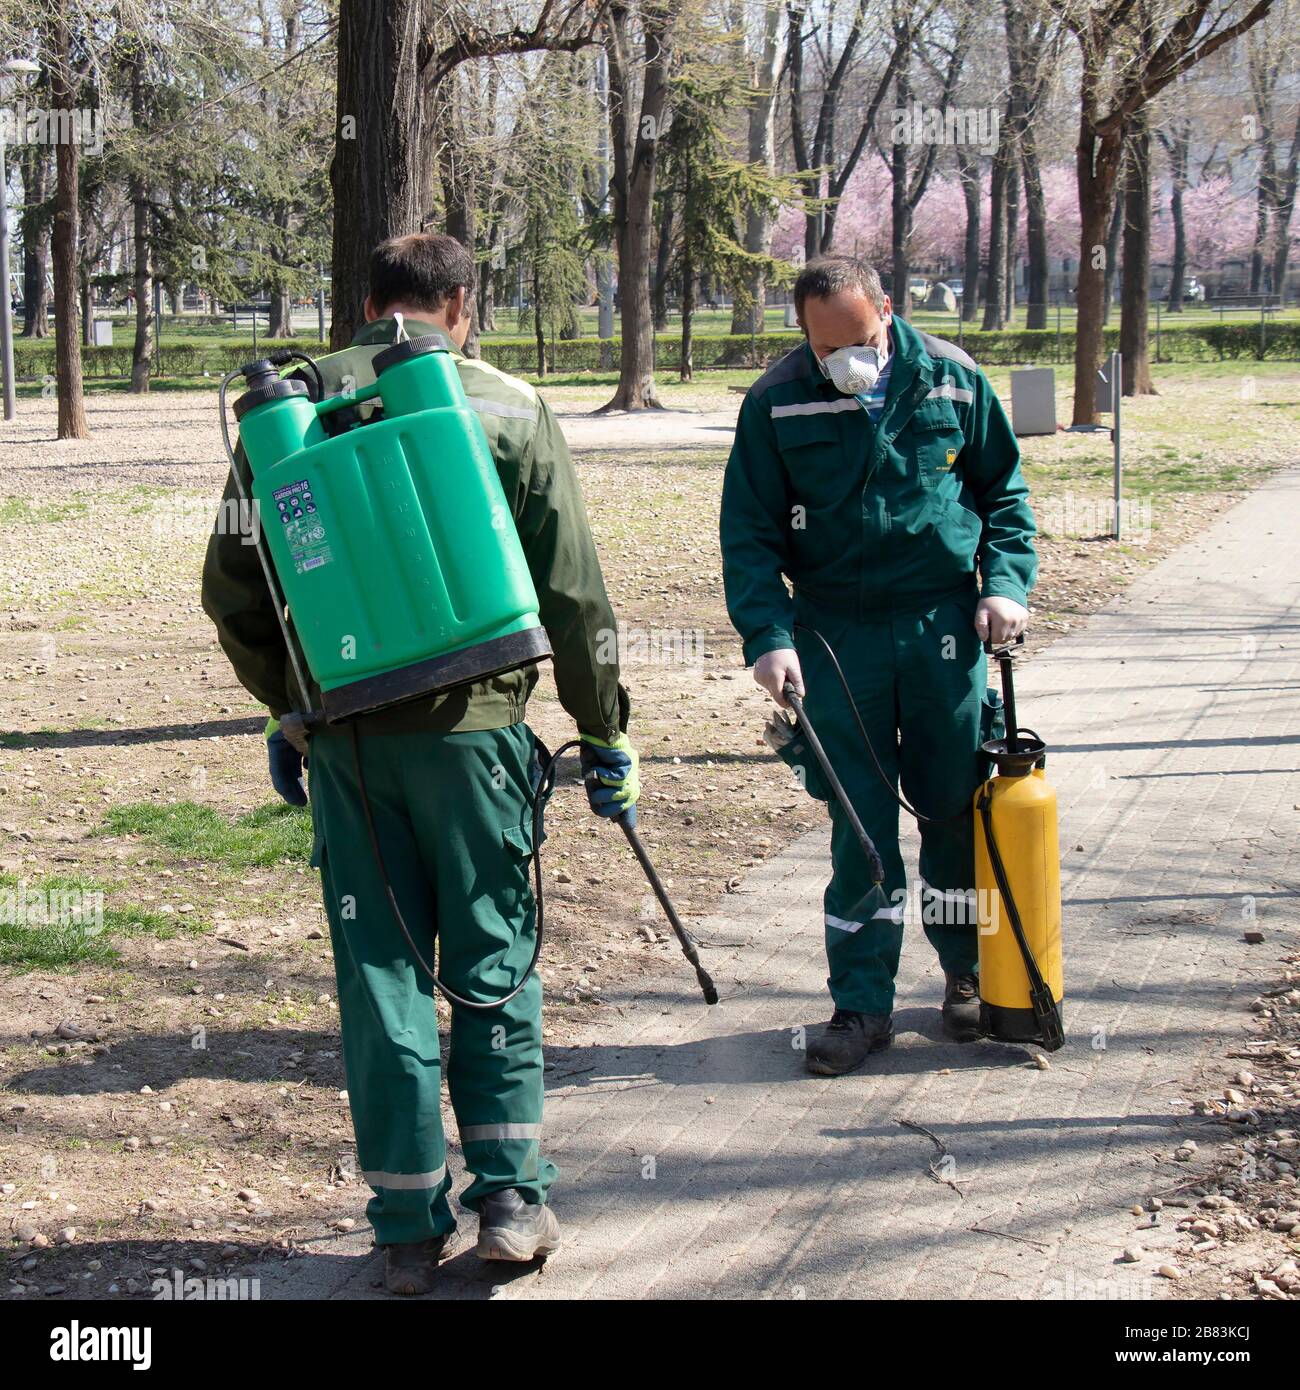 Belgrade, Serbia - March 19, 2020: Two workers from city greenery doing outdoor park disinfection spraying for prevention of Corona virus spreading Stock Photo